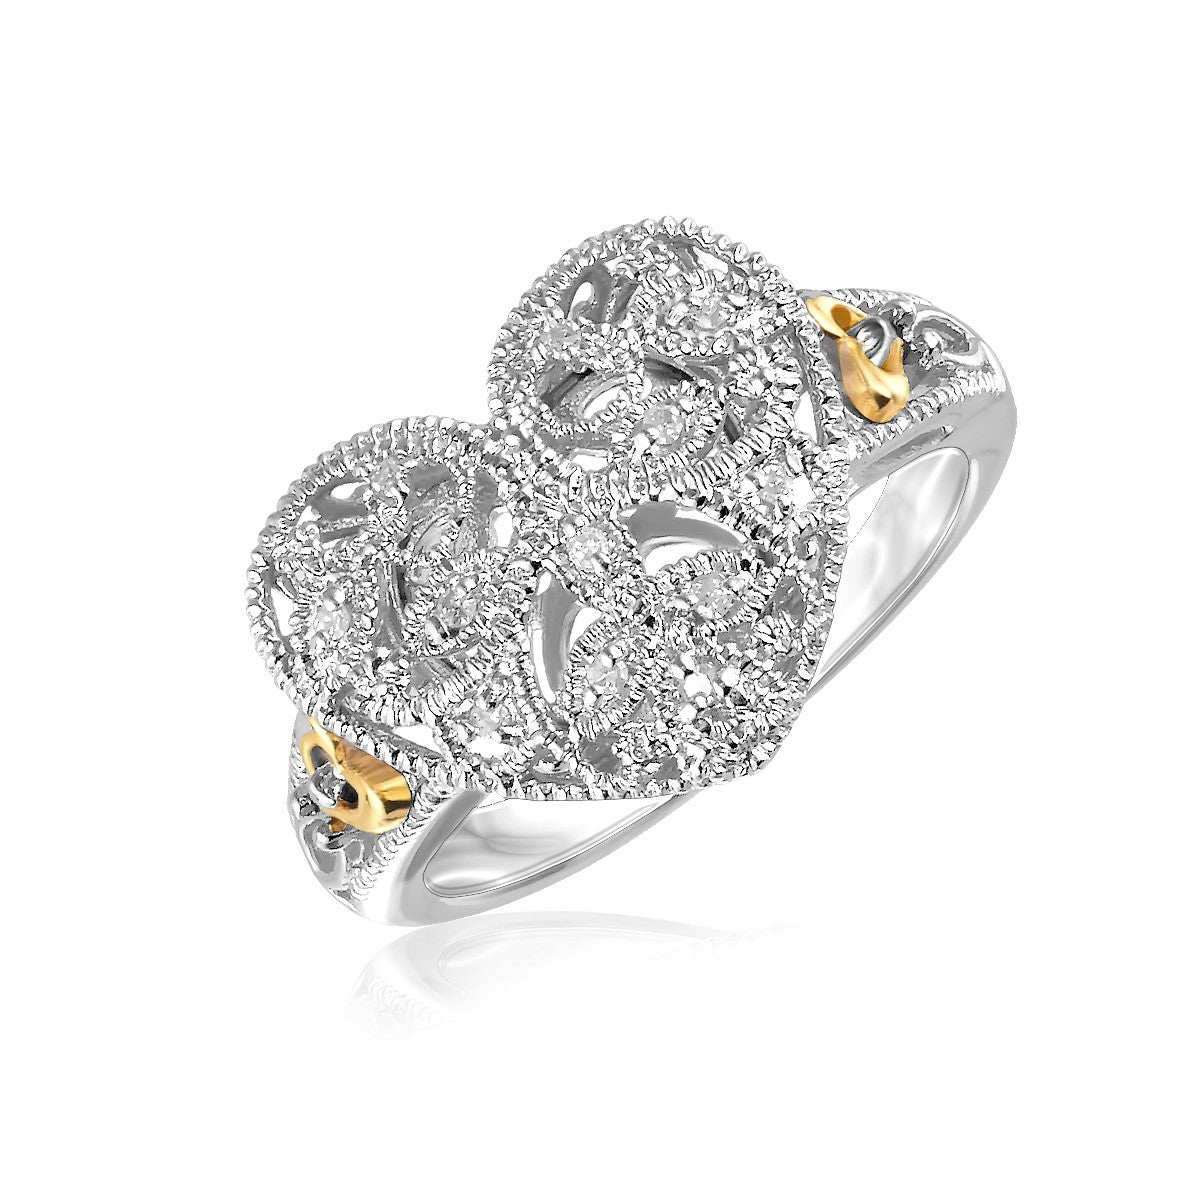 Designer Sterling Silver and 14k Yellow Gold Filigree Heart Ring with Diamonds